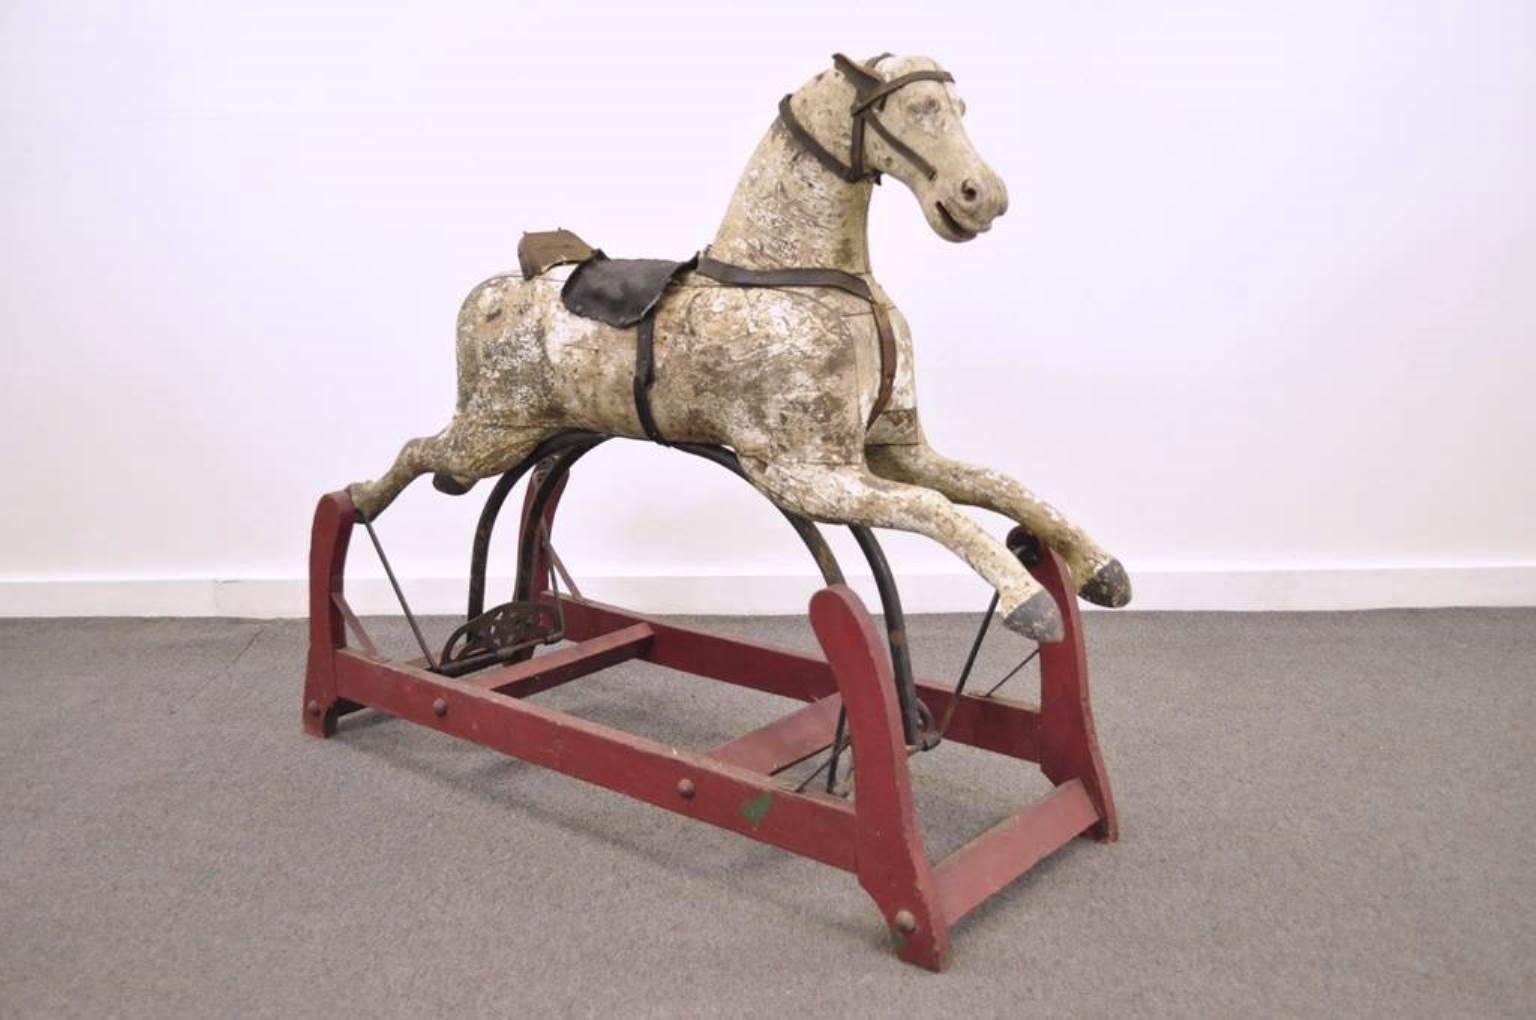 Antique American primitive handmade gliding hobby horse. The piece features a carved wood horse, red painted wood base, cast iron hardware with star accents, and leather straps and saddle. The attention to detail is readily apparent, even after 100+